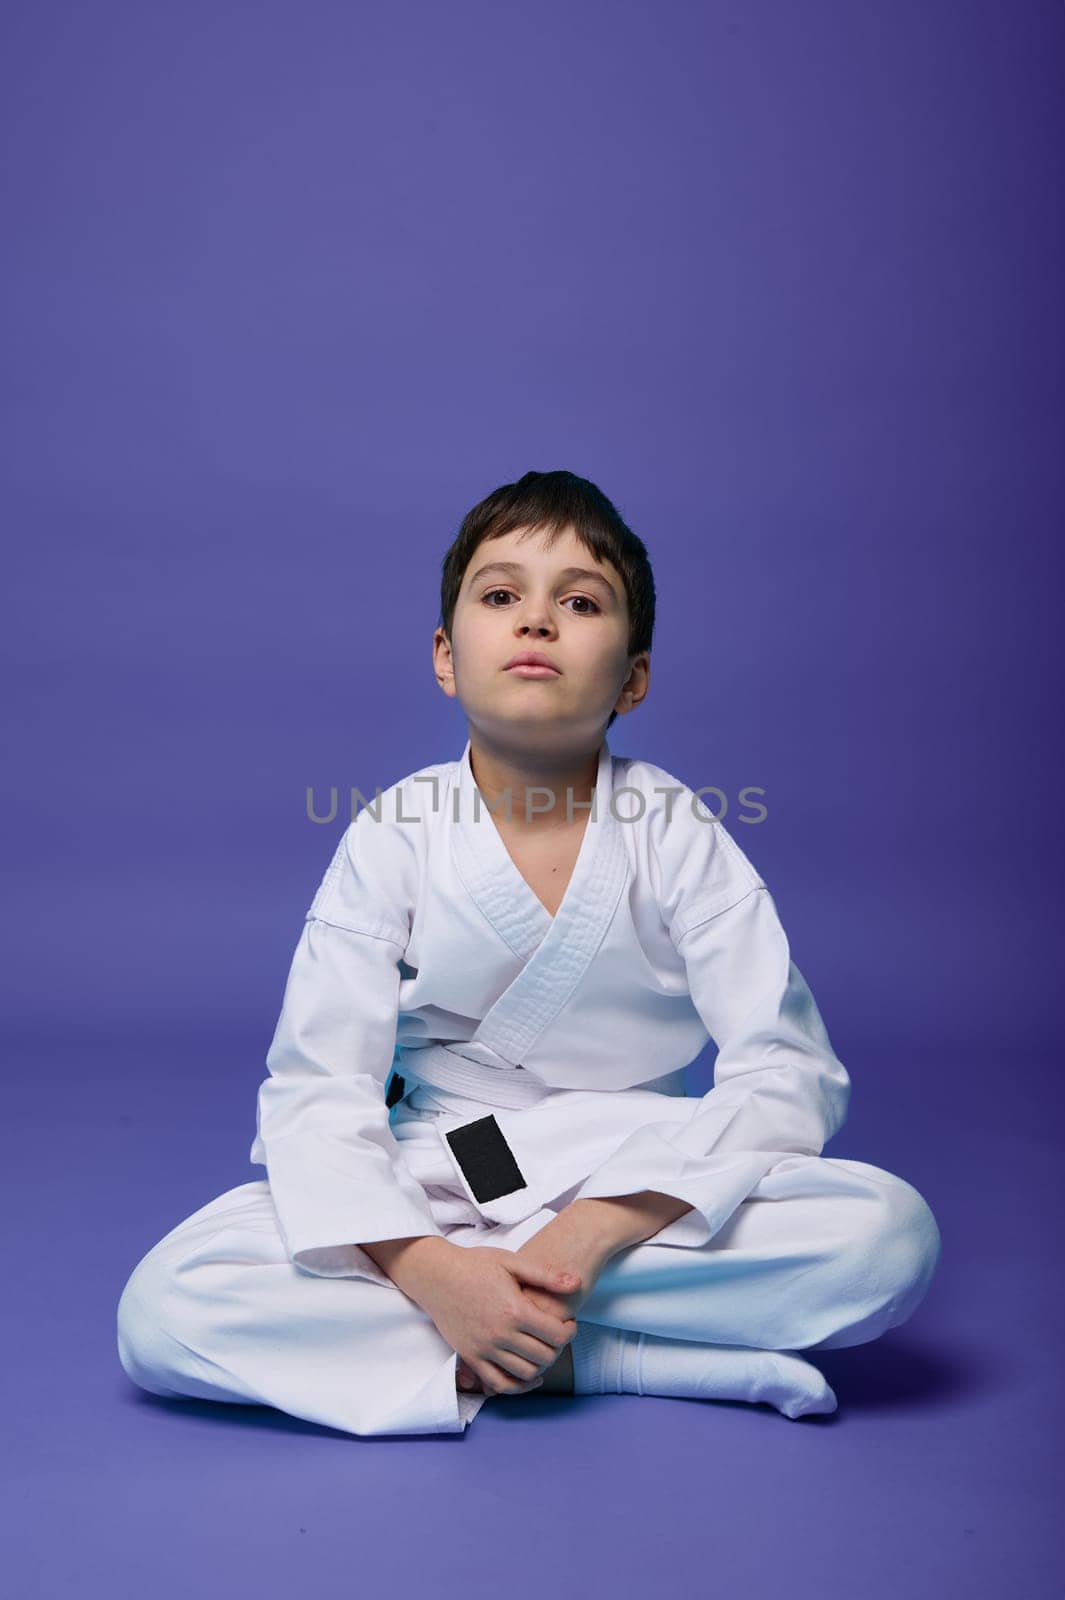 Charming confident Caucasian teenager - aikido fighter - in white kimono sitting in lotus position while practicing oriental martial arts on purple background with copy ad space for text